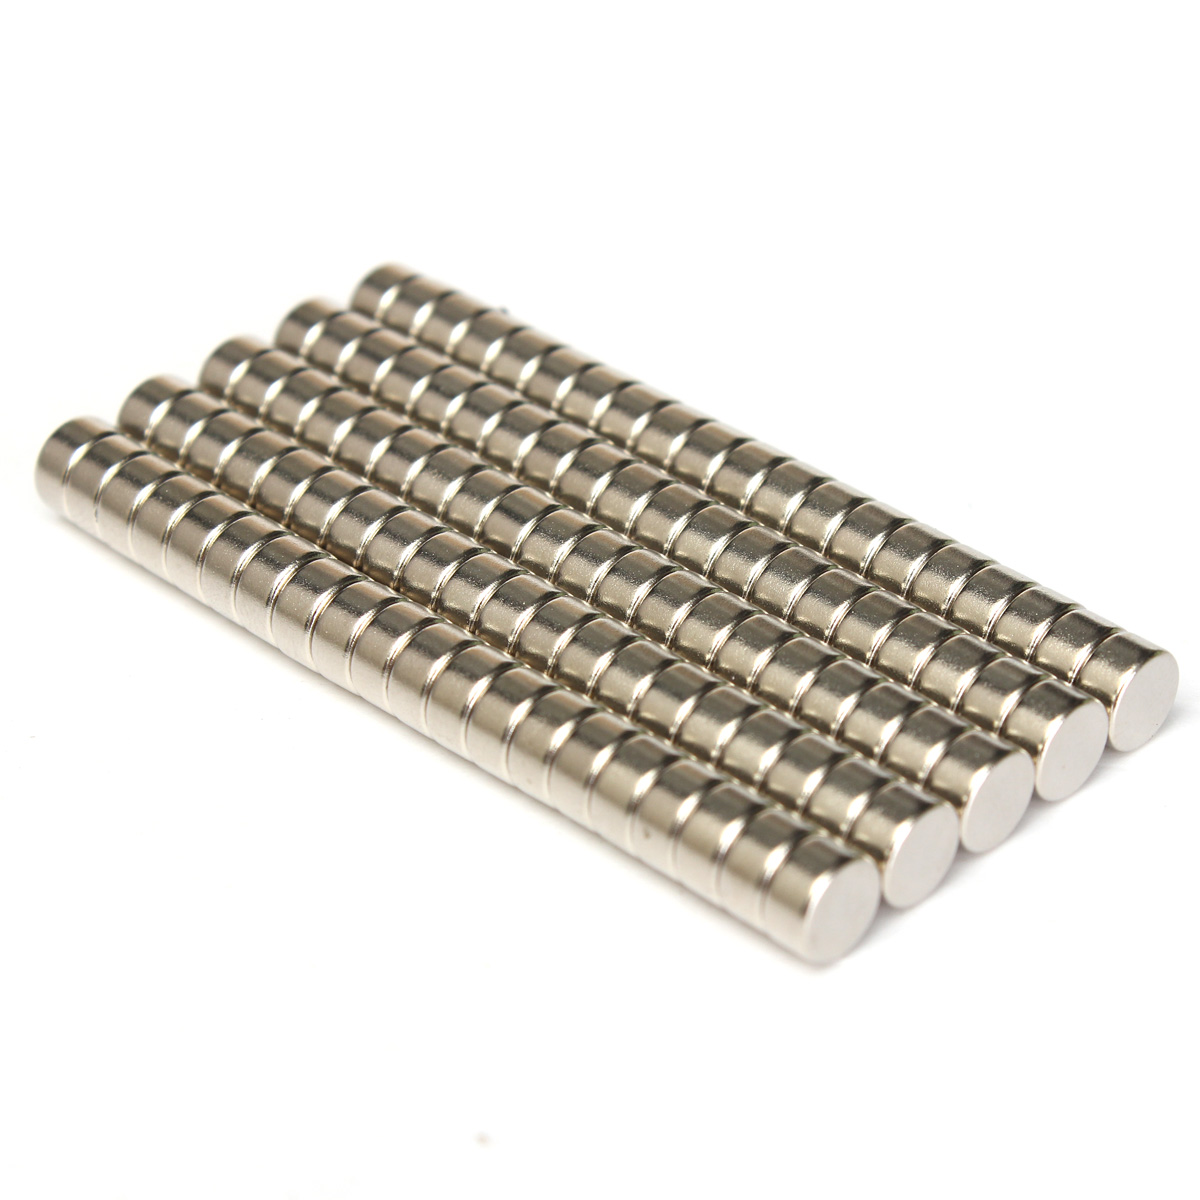 100pcs-N52-6mm-x-3mm-Strong-Cylinder-Magnet-Rare-Earth-Neodymium-Magnet-977186